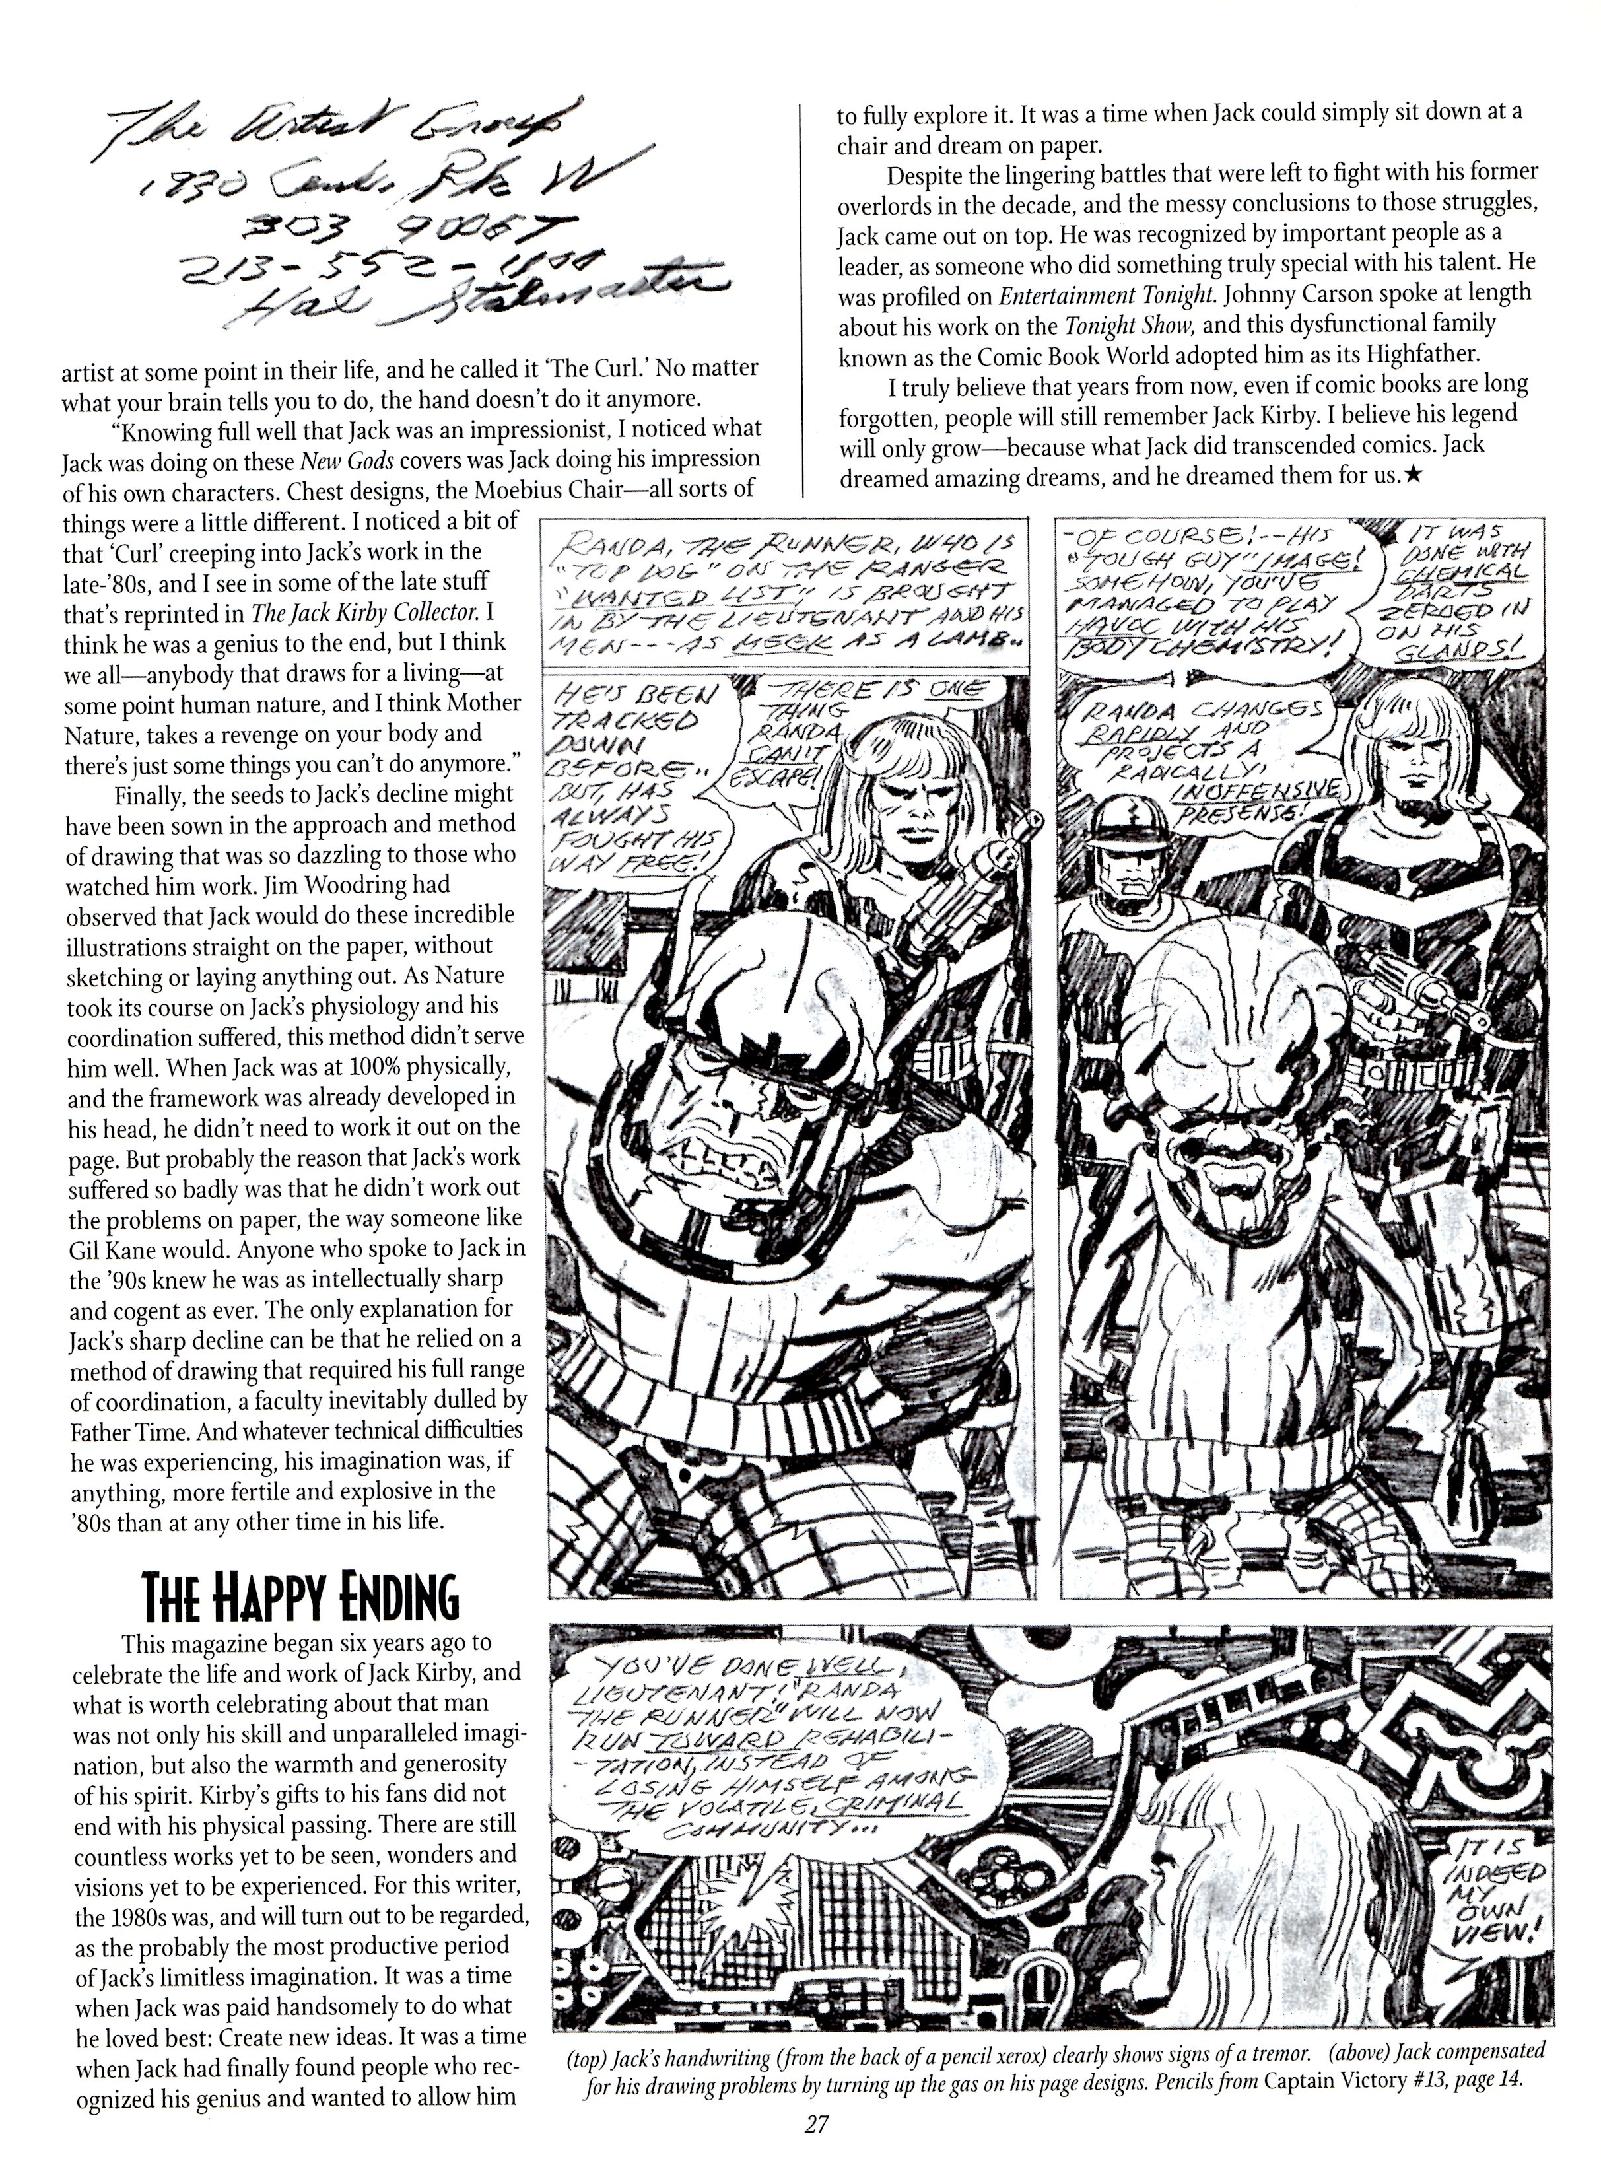 Read online The Jack Kirby Collector comic -  Issue #30 - 27